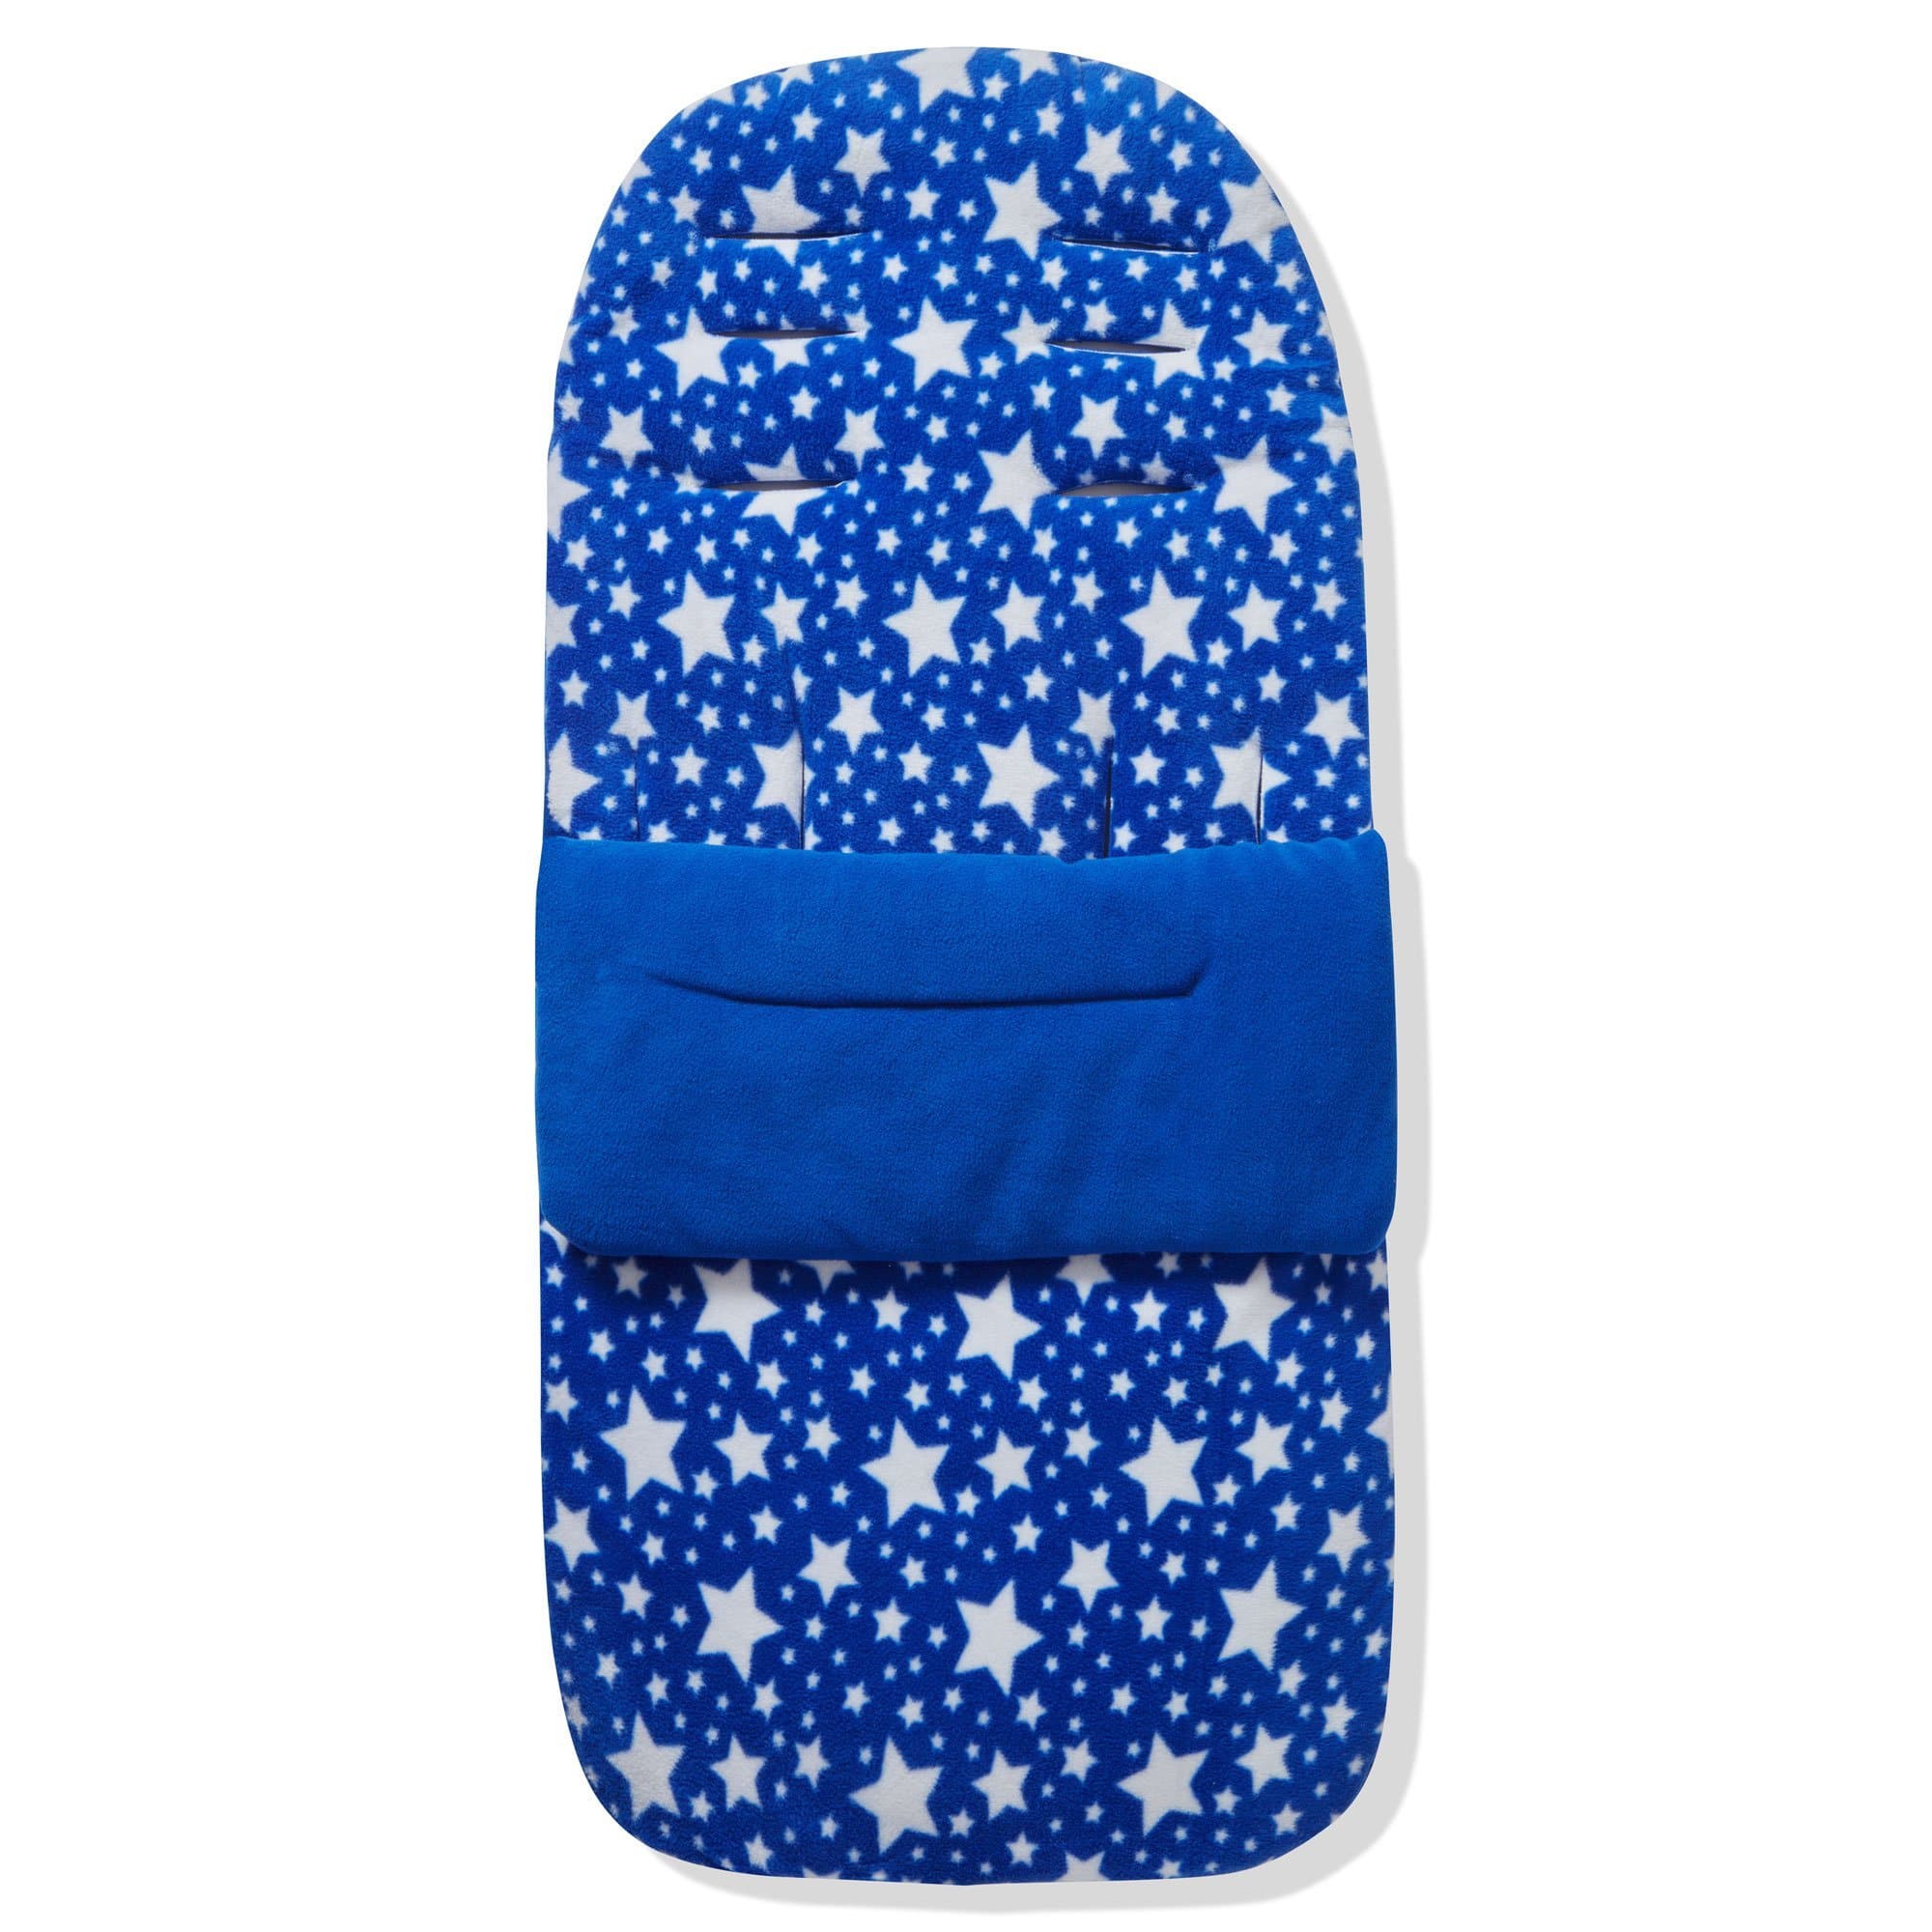 Fleece Footmuff / Cosy Toes Compatible With Cosatto - Blue Star / Fits All Models | For Your Little One